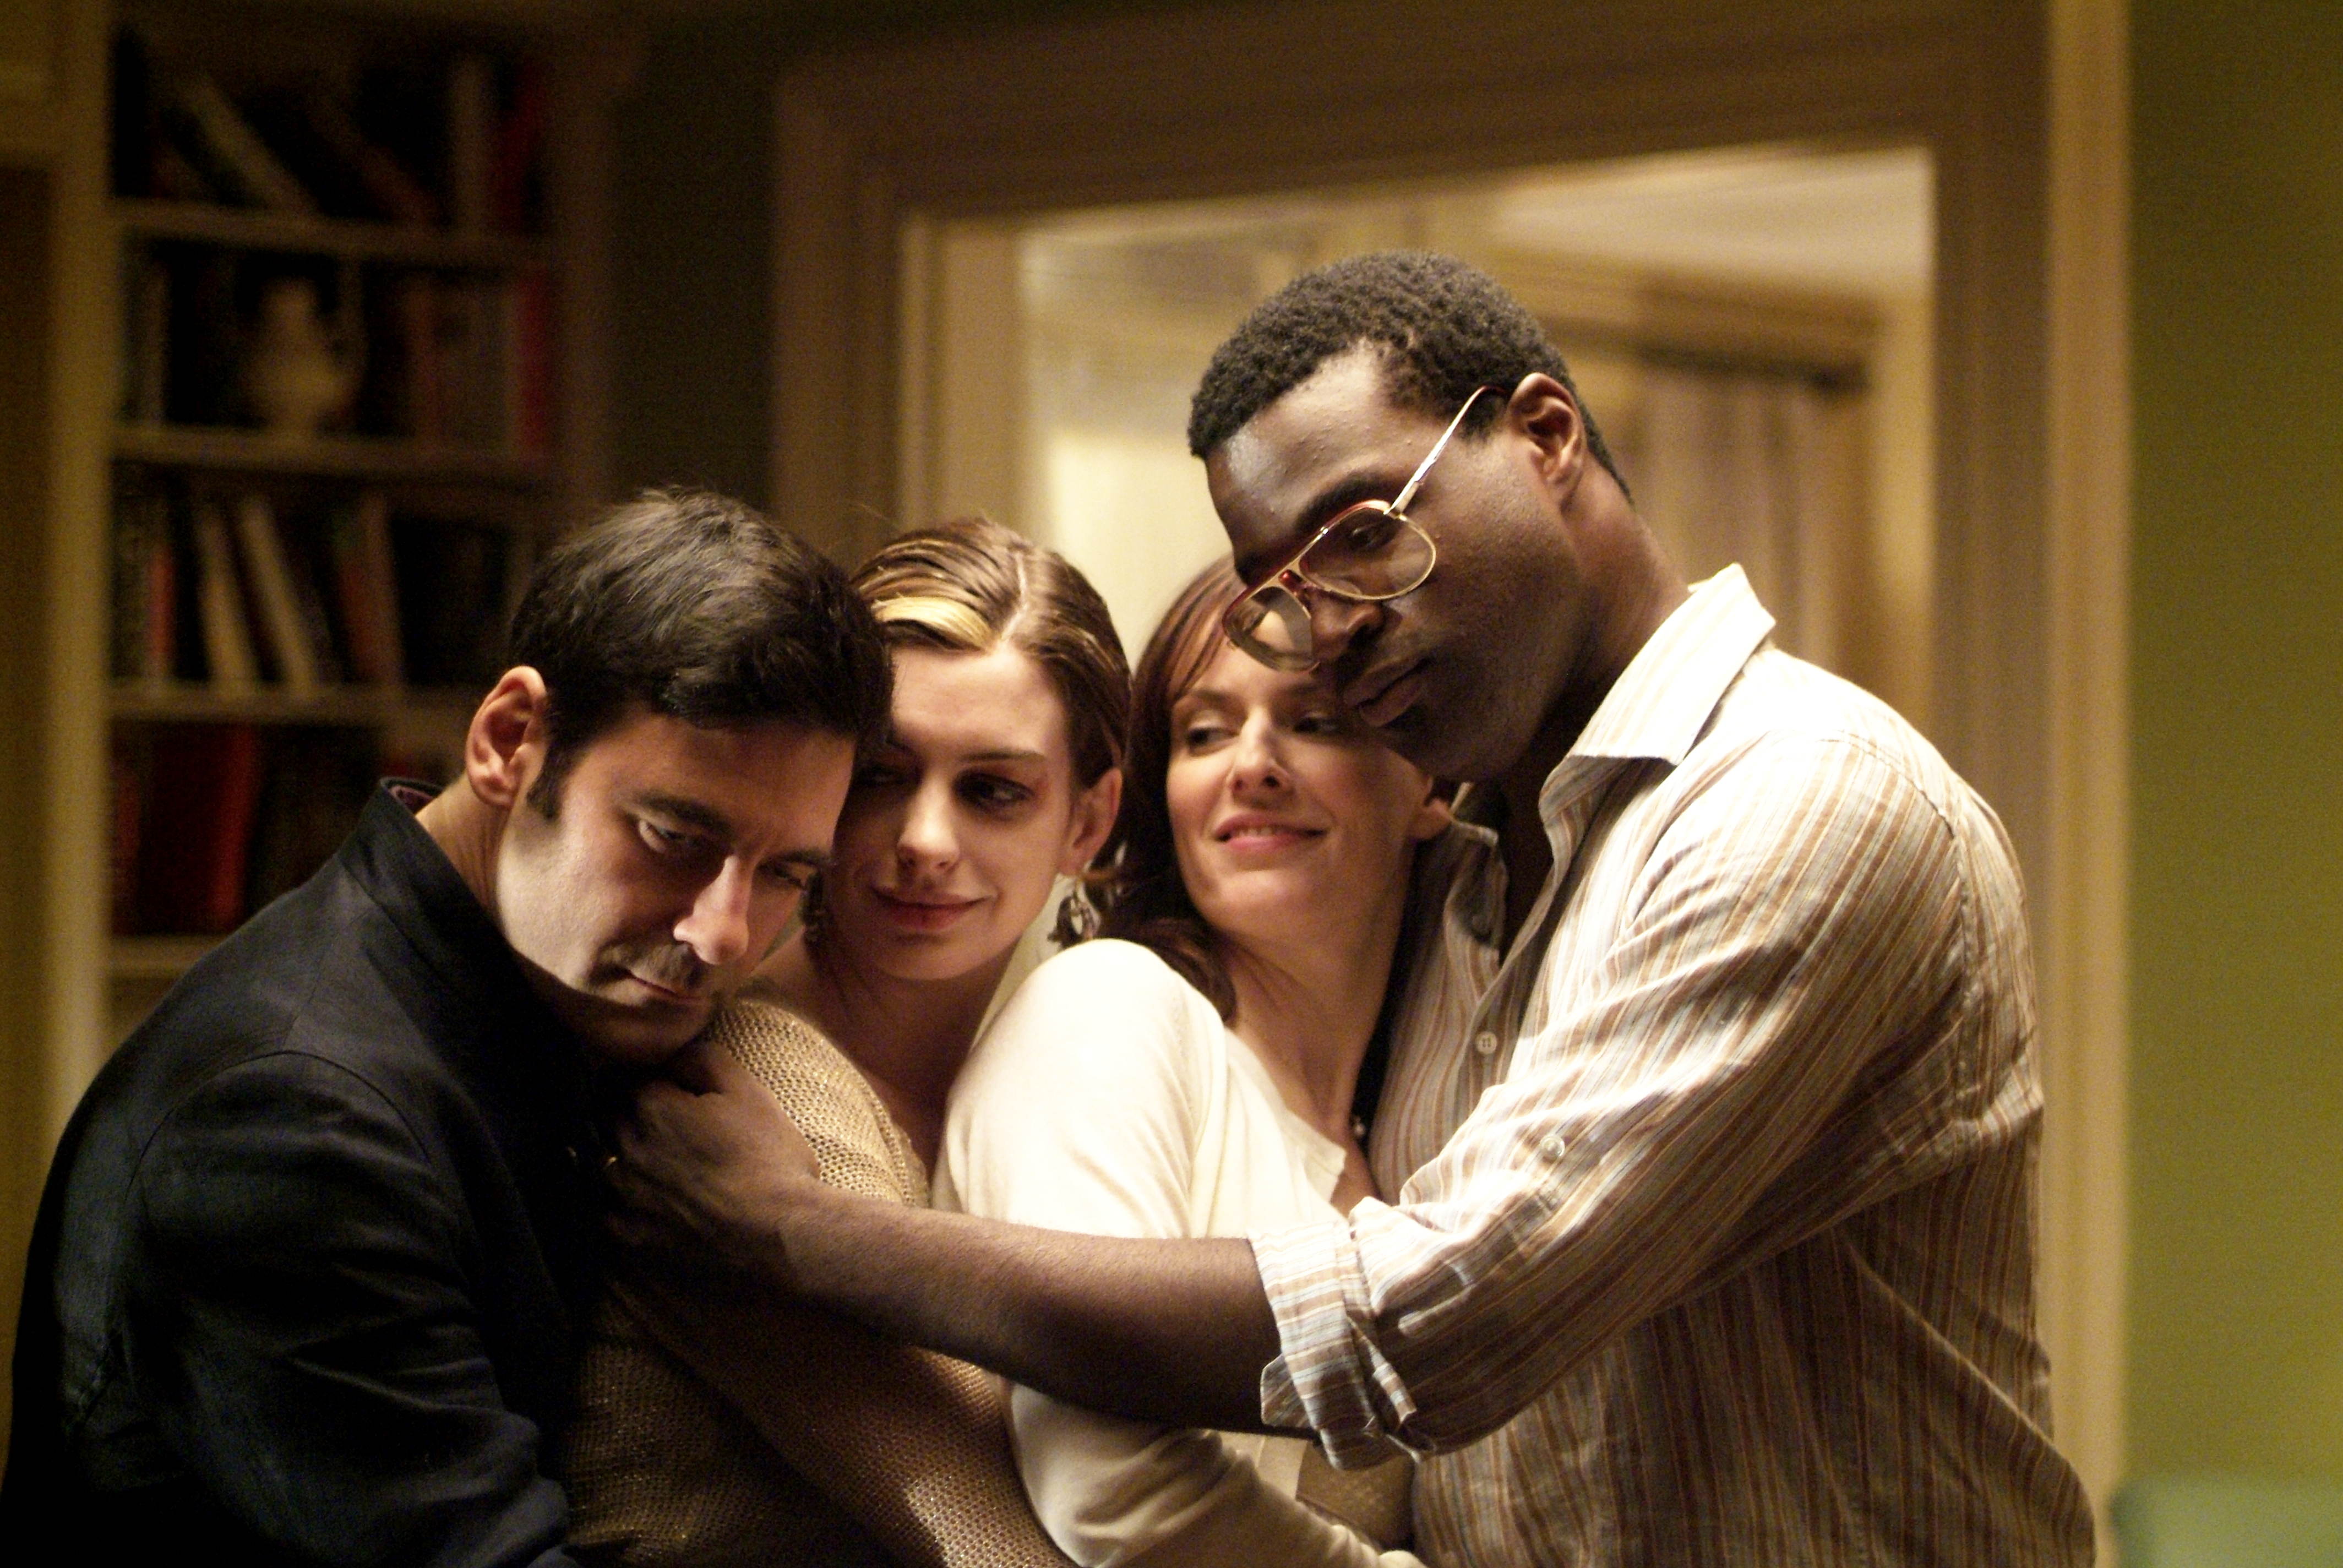 Mather Zickel,Anne Hathaway,Rosemarie DeWitt and Tunde Adebimpe in Sony Pictures Classics' Rachel Getting Married (2008). Photo by Bob Vergara.